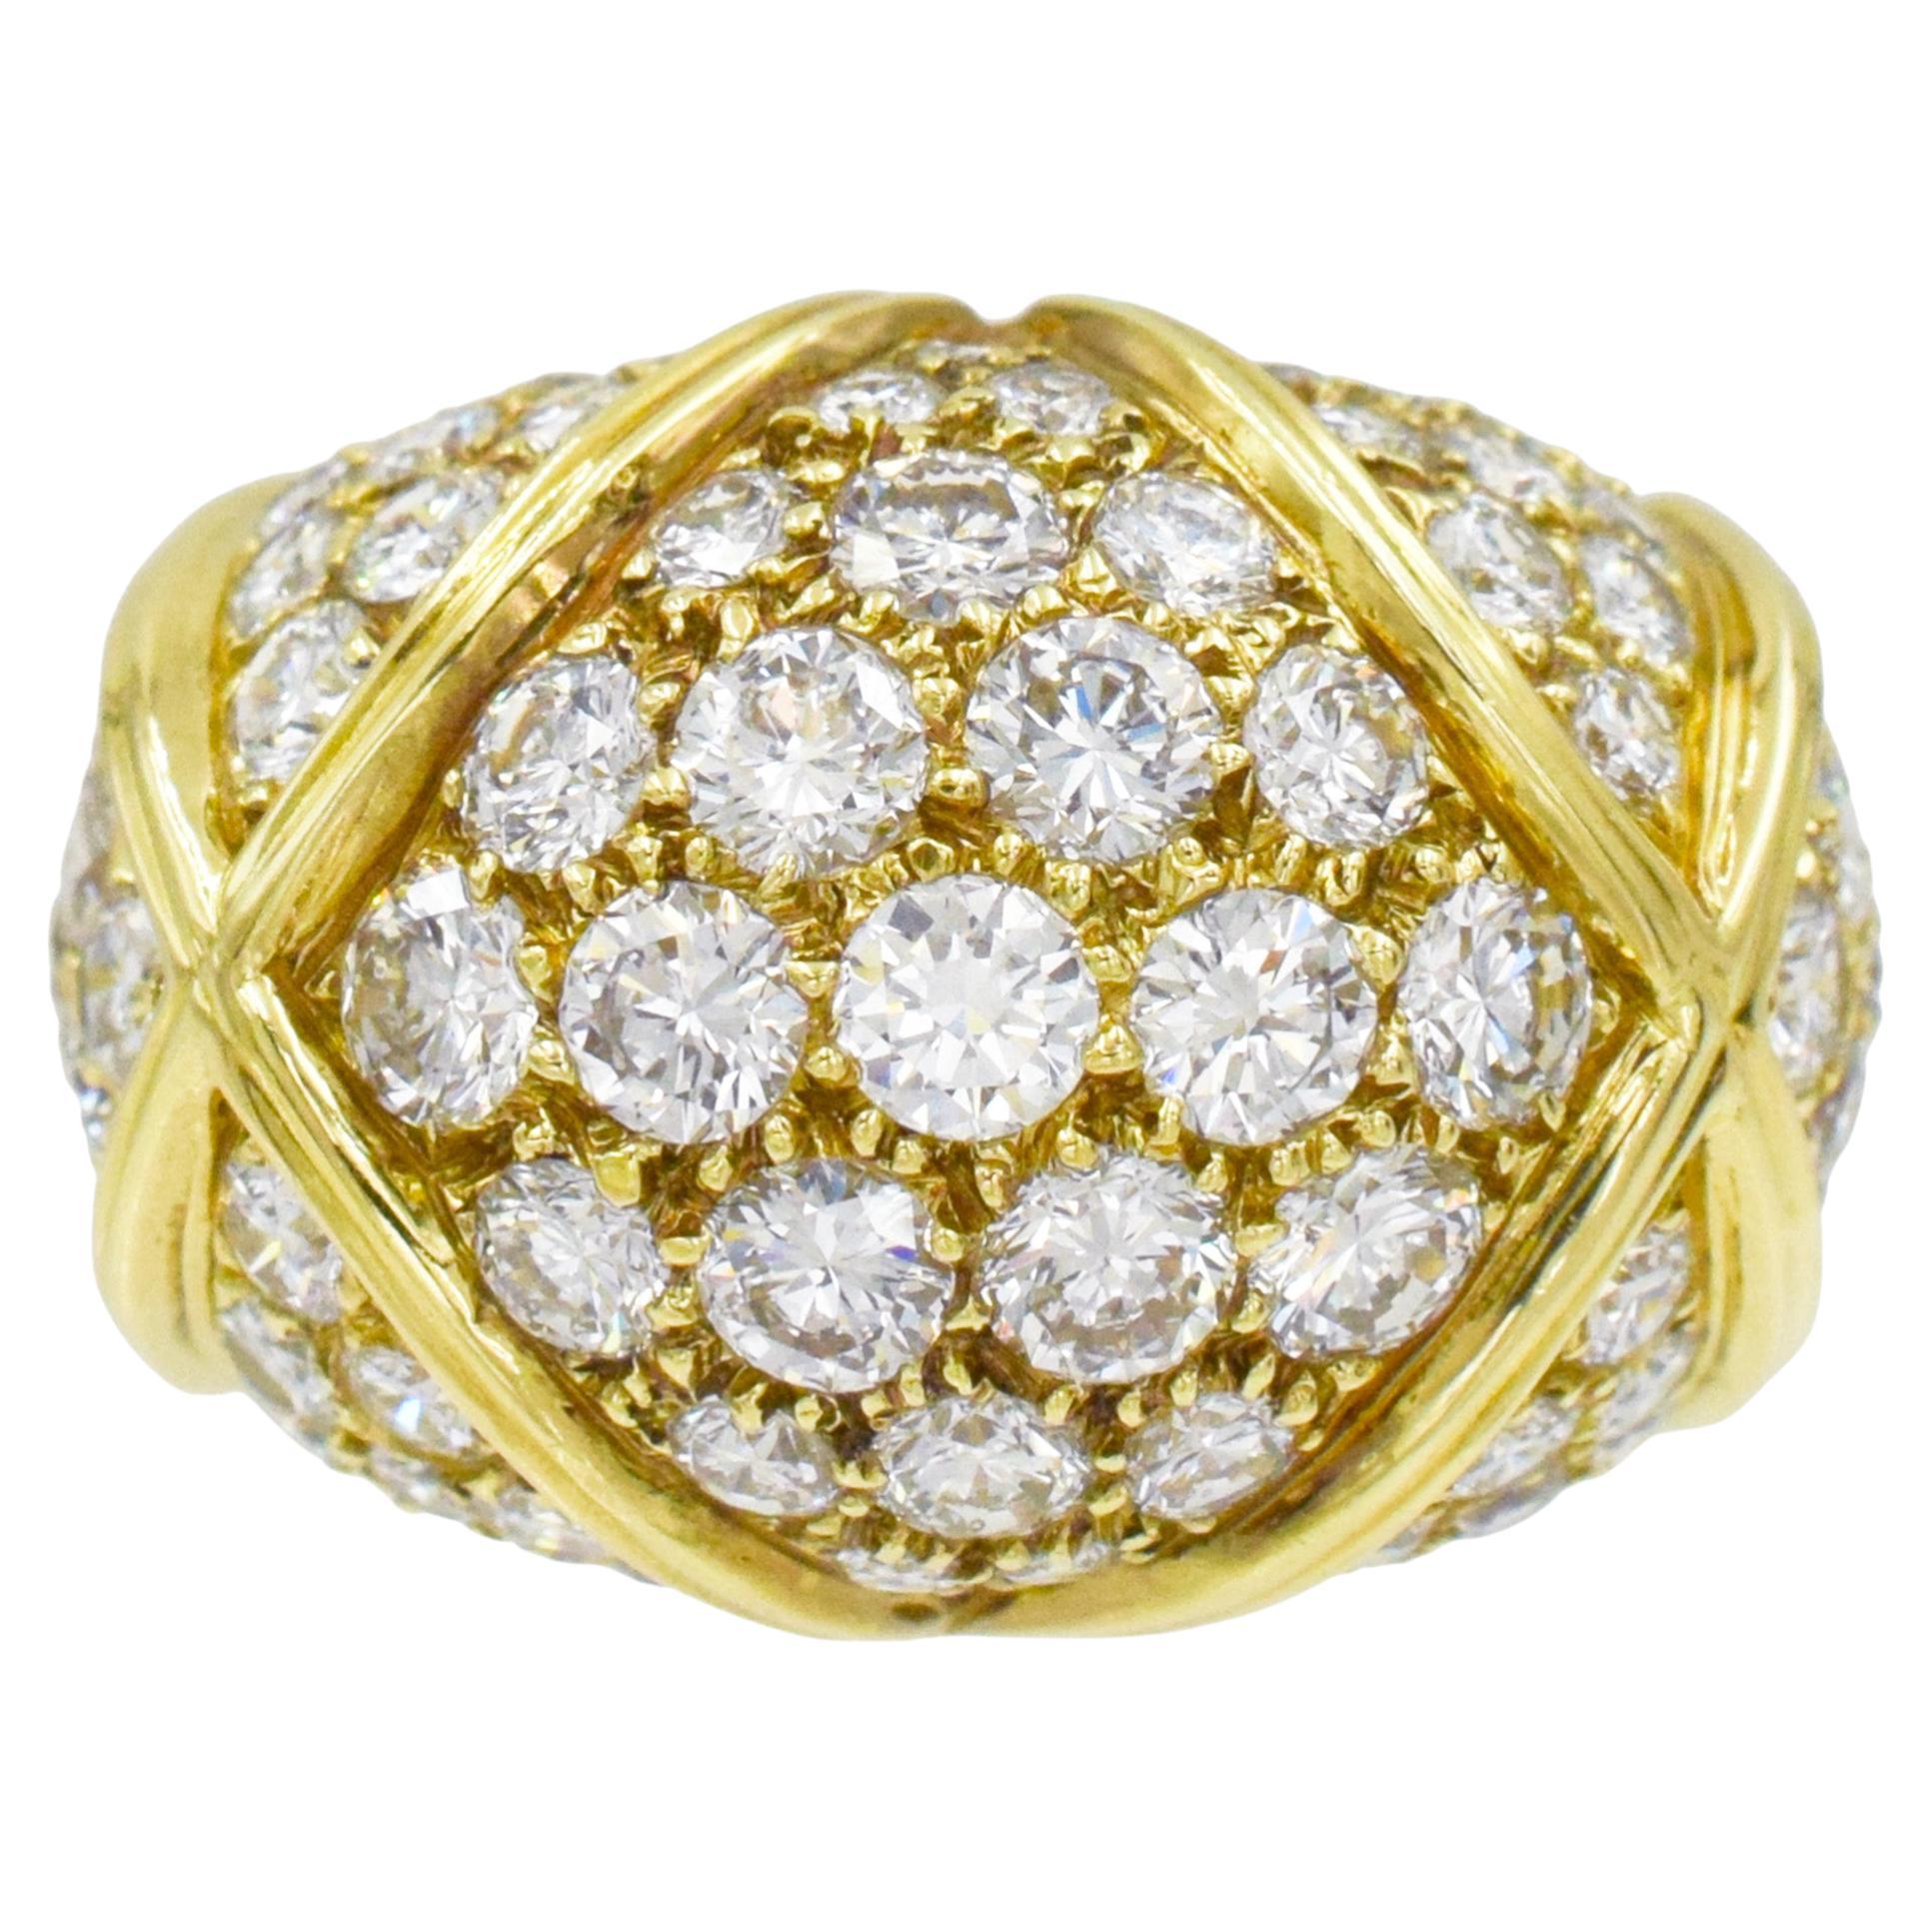 Van Cleef & Arpels Gold and Diamond Dome Ring